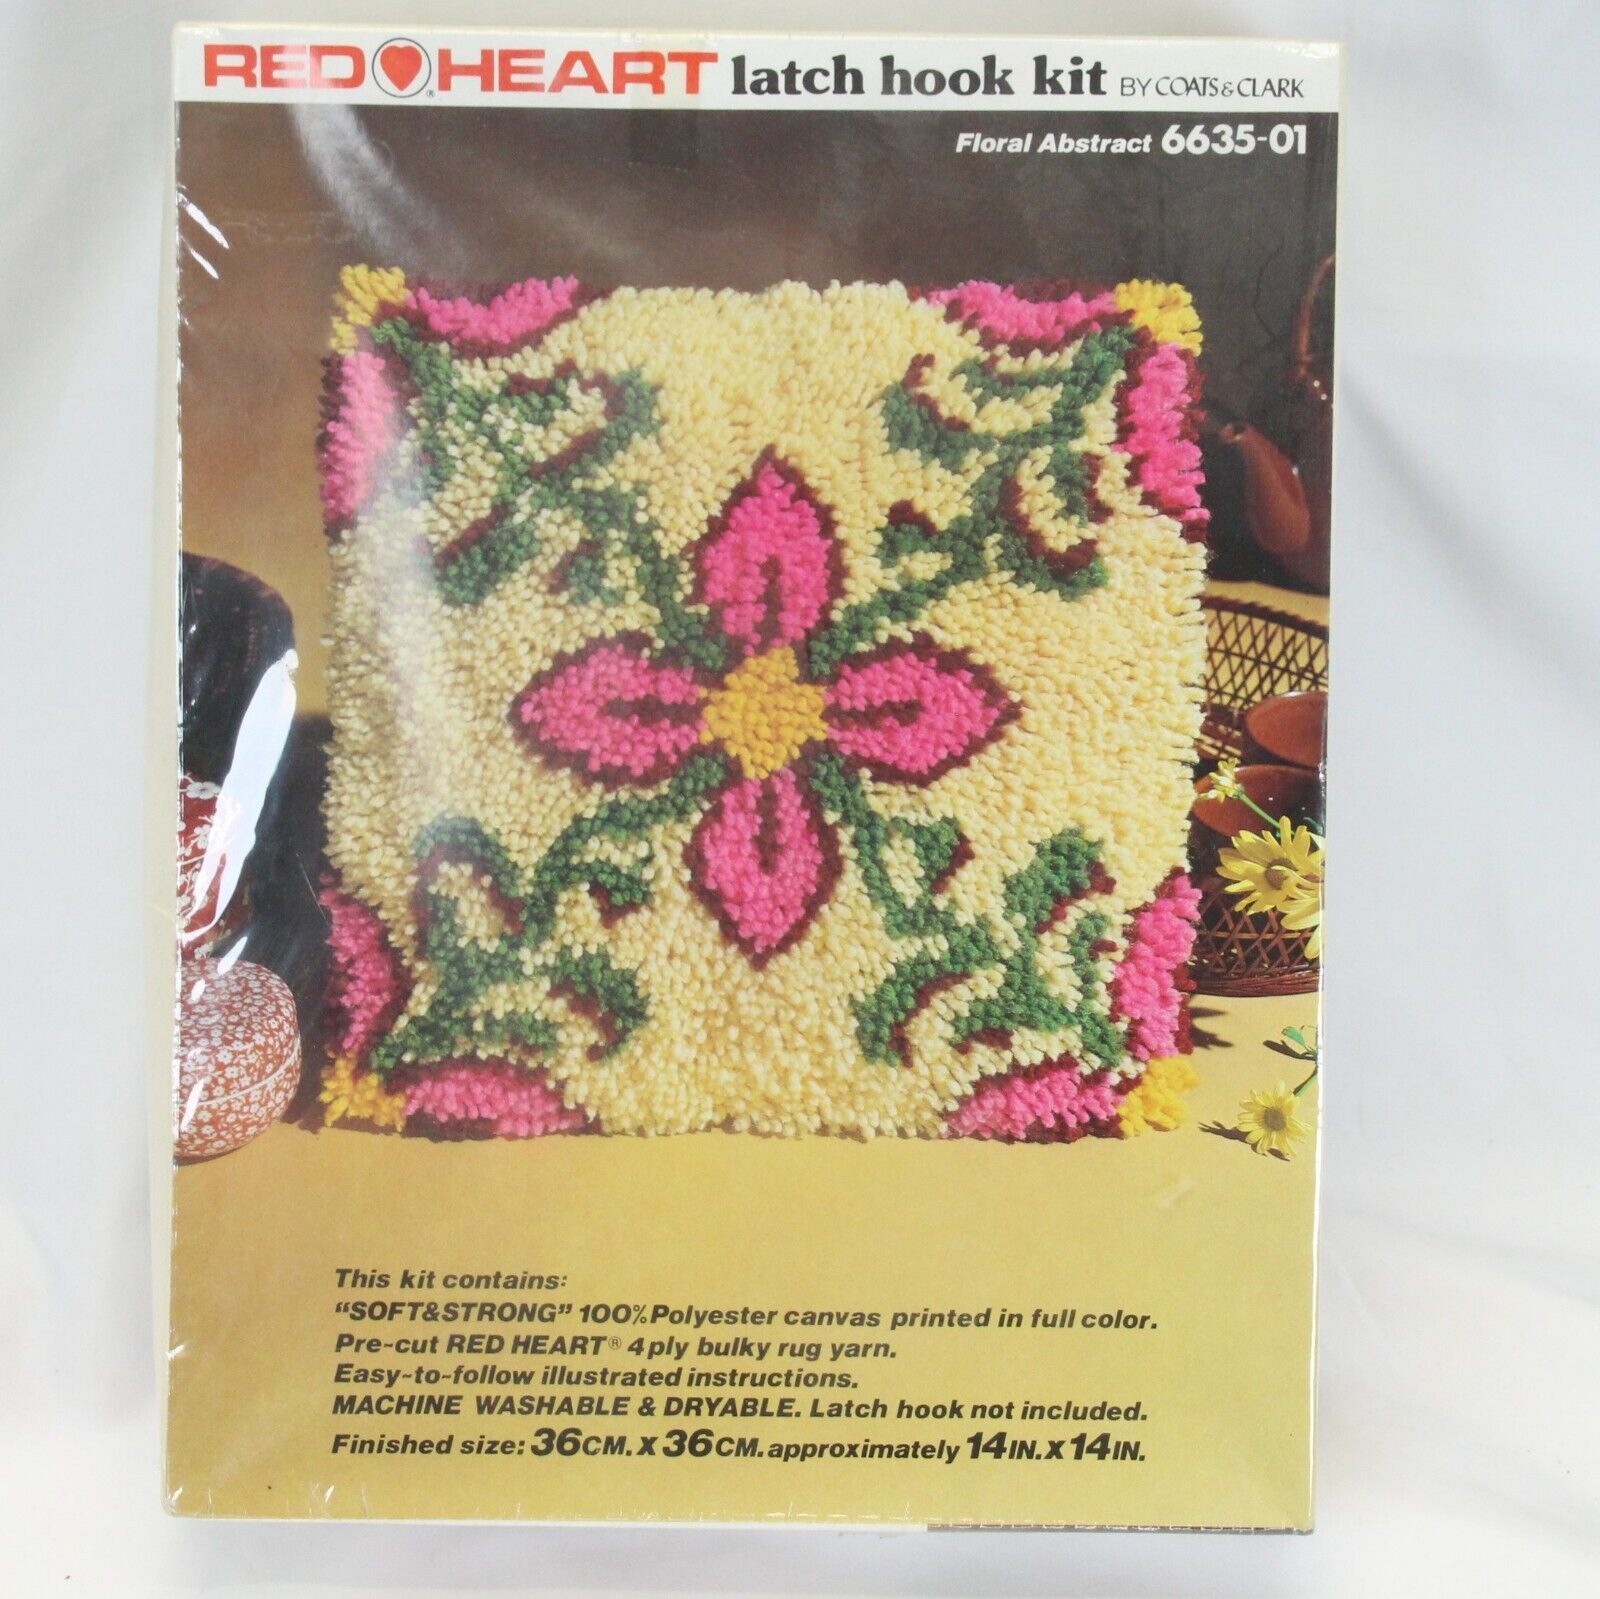 Red Heart Latch Hook Kit Floral Abstract 6635-01  14" x 14" Factory Sealed - $18.61